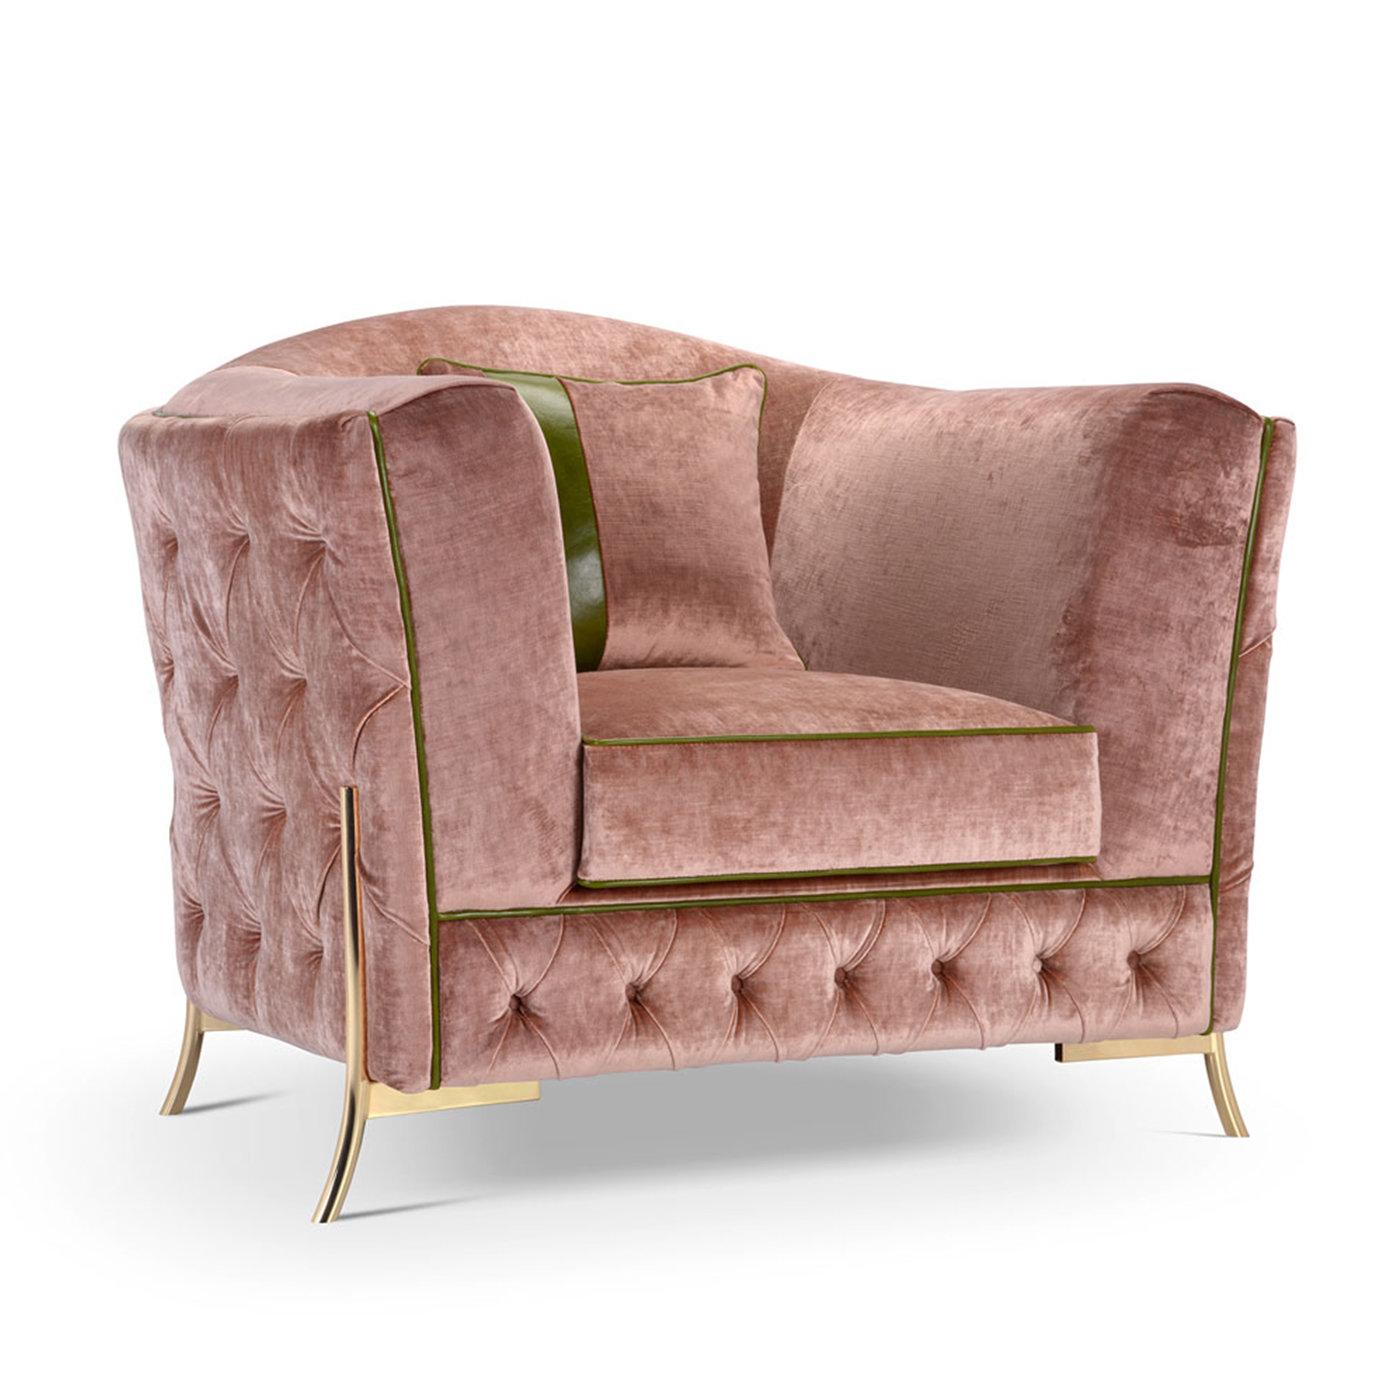 Inspired by Nefele, the Greek nymph of clouds, this glorious armchair flaunts a rich sartorial silhouette elegantly sustained by curved metal feet boasting a galvanized-brass finish. Exceptional capitonne tufting accents the base and the backrest's